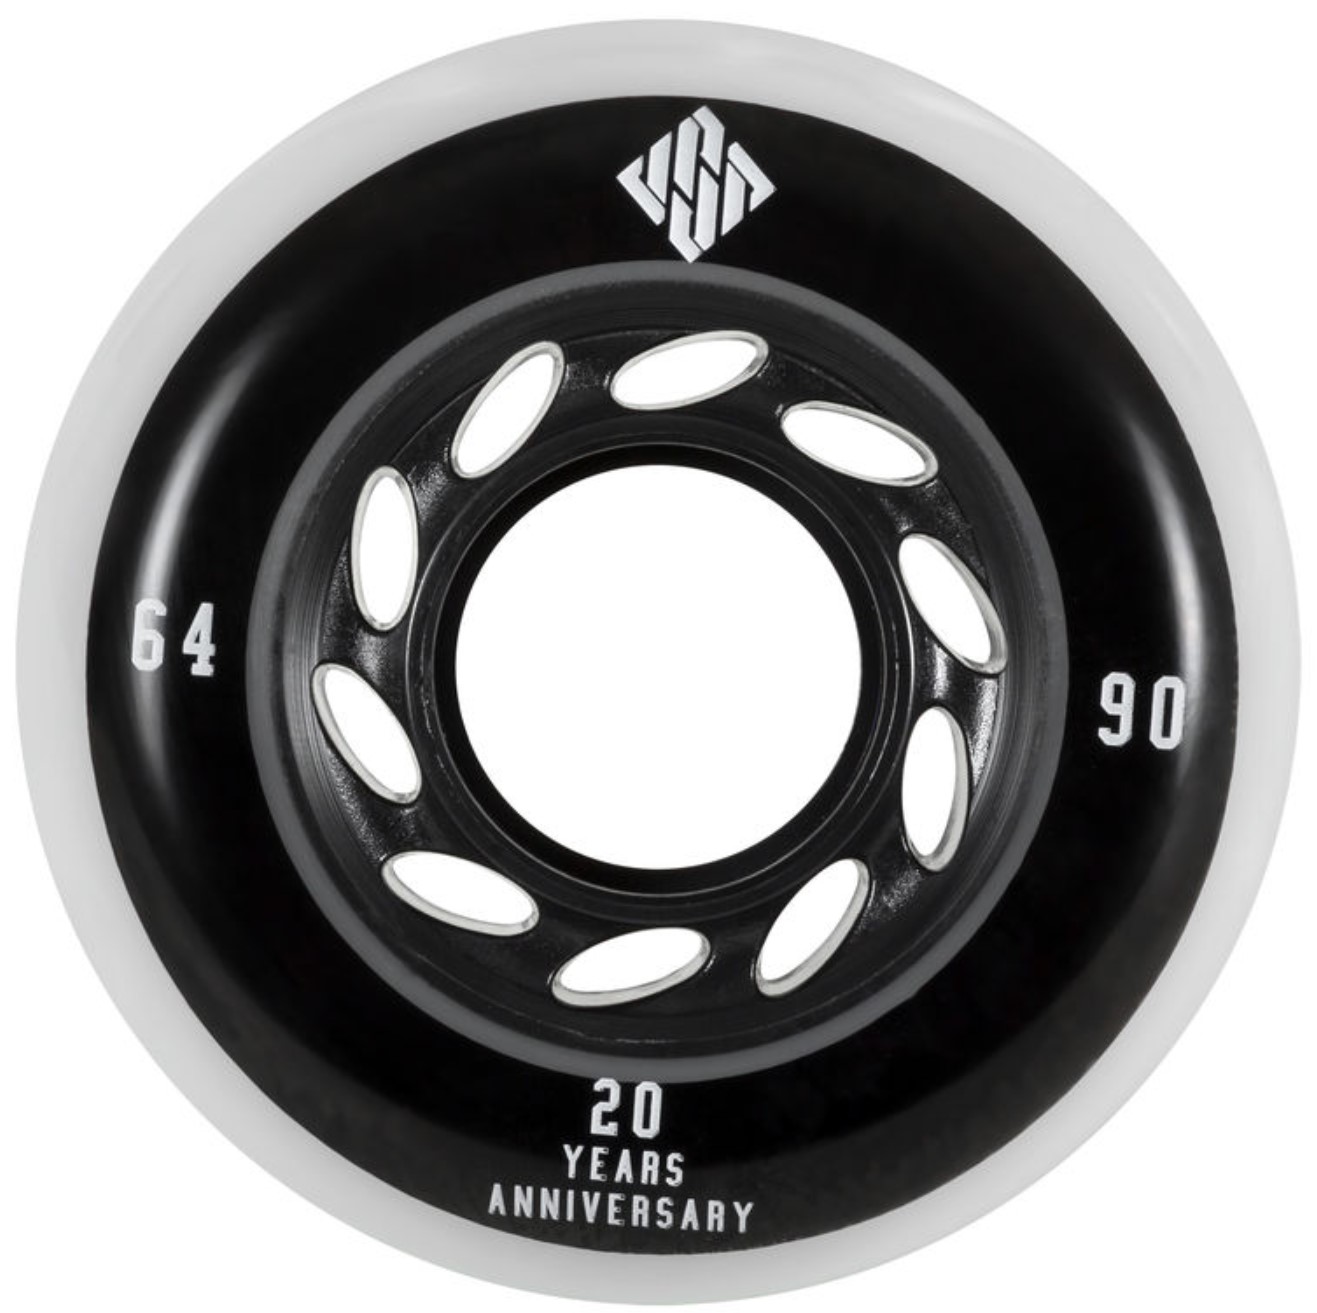 USD Team 64mm 90A 4 pack for aggressive inline skating